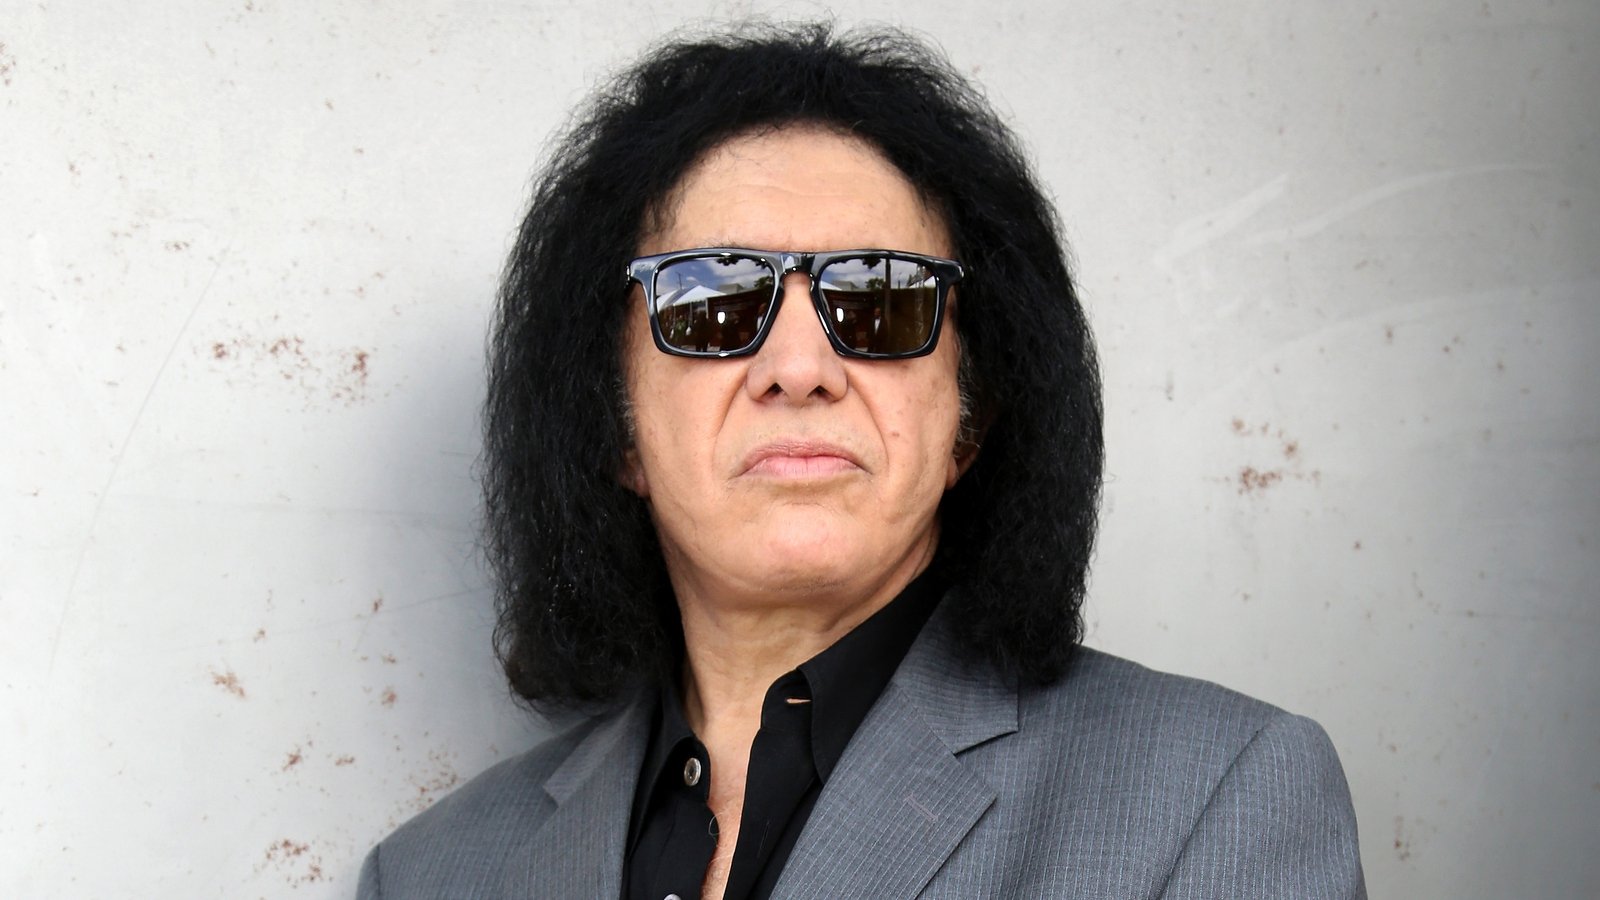 Gene Simmons Home Searched In Child Porn Sweep